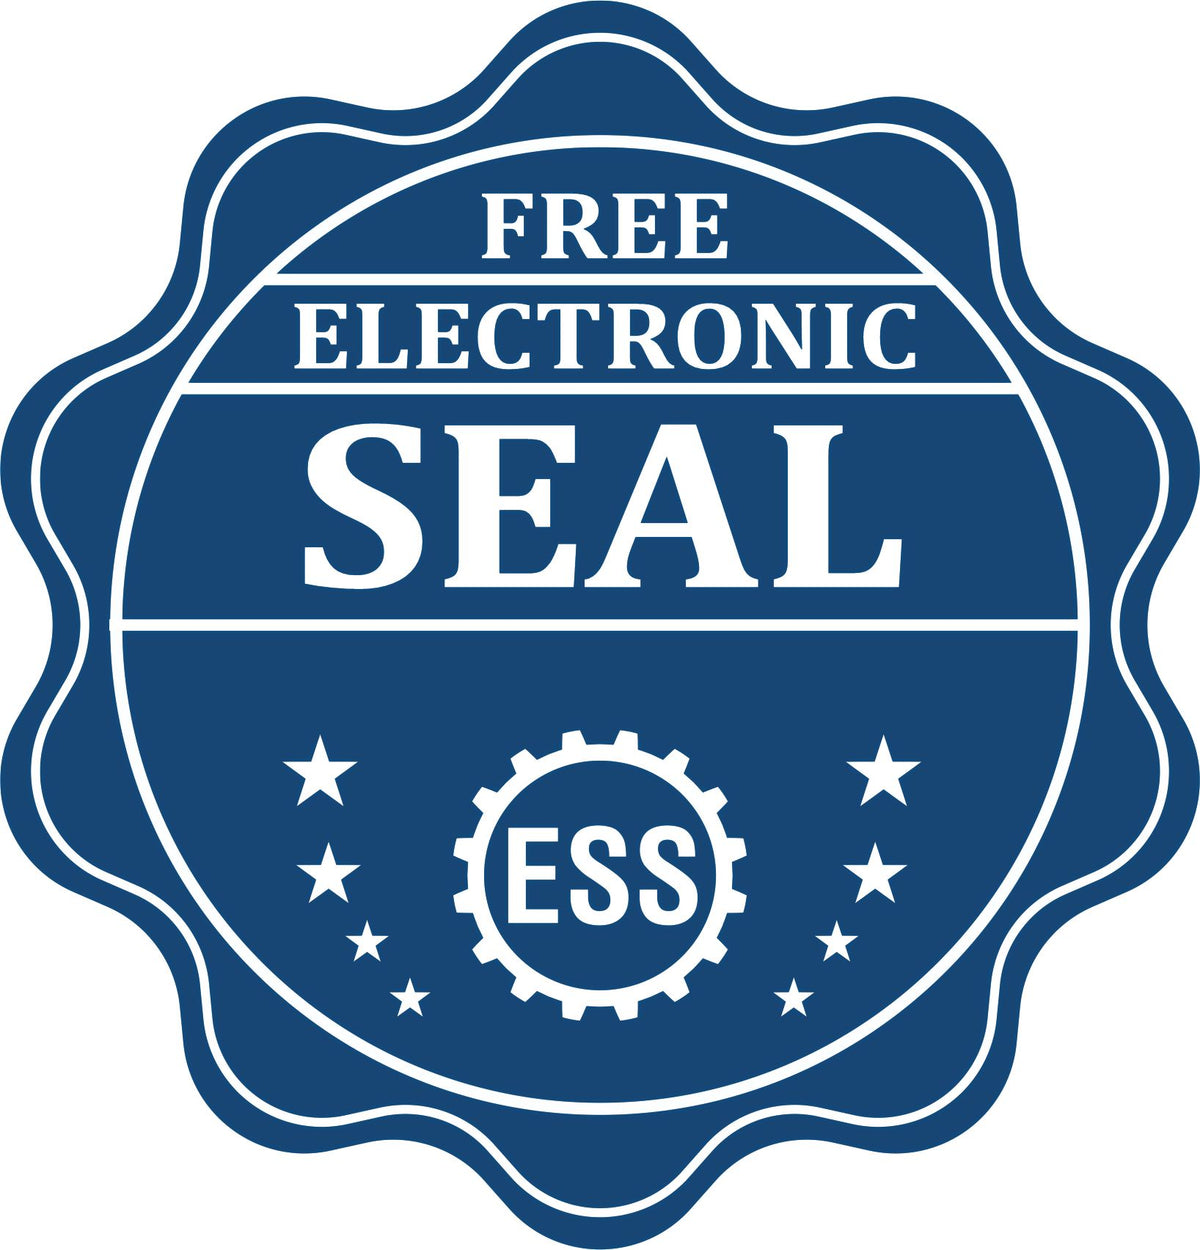 A badge showing a free electronic seal for the Gift California Engineer Seal with stars and the ESS gear on the emblem.